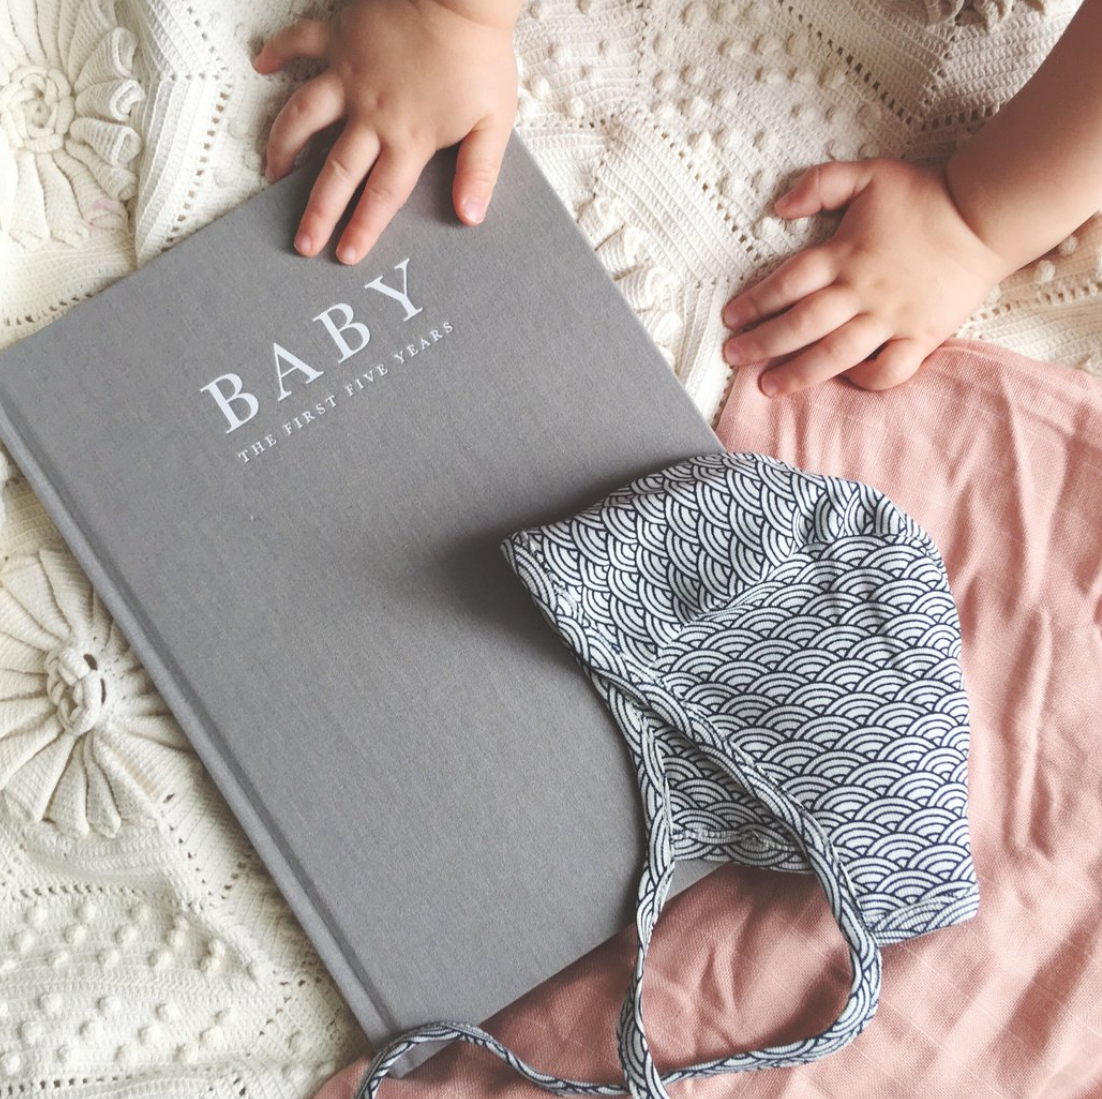 Baby journal book